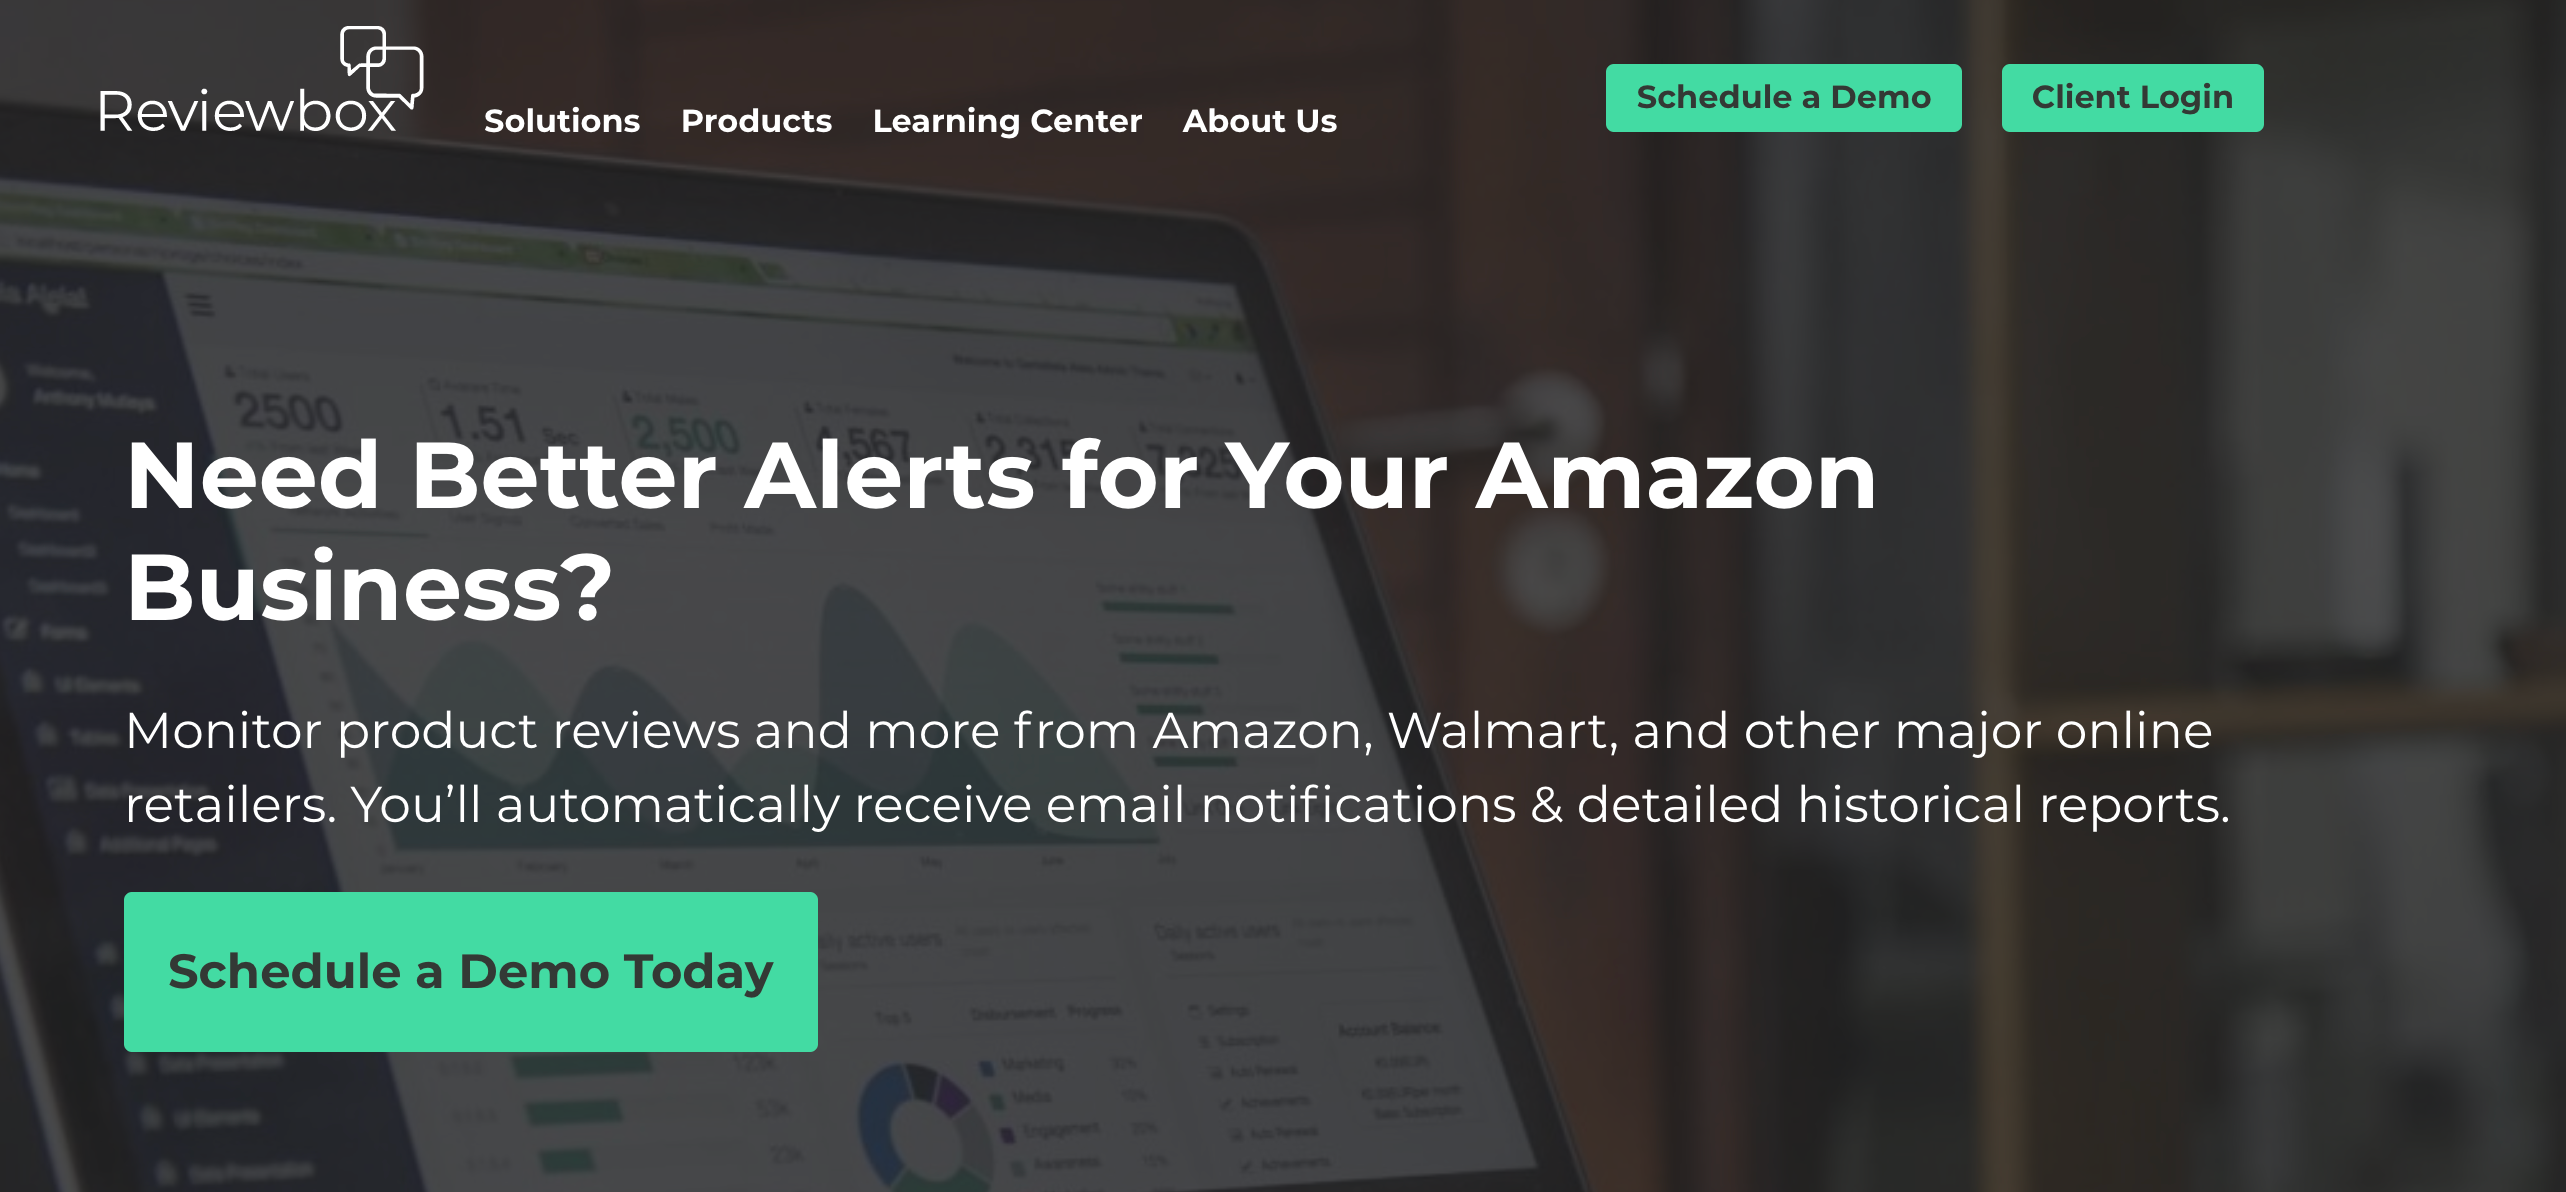 Better Alerts for Amazon - Reviewbox